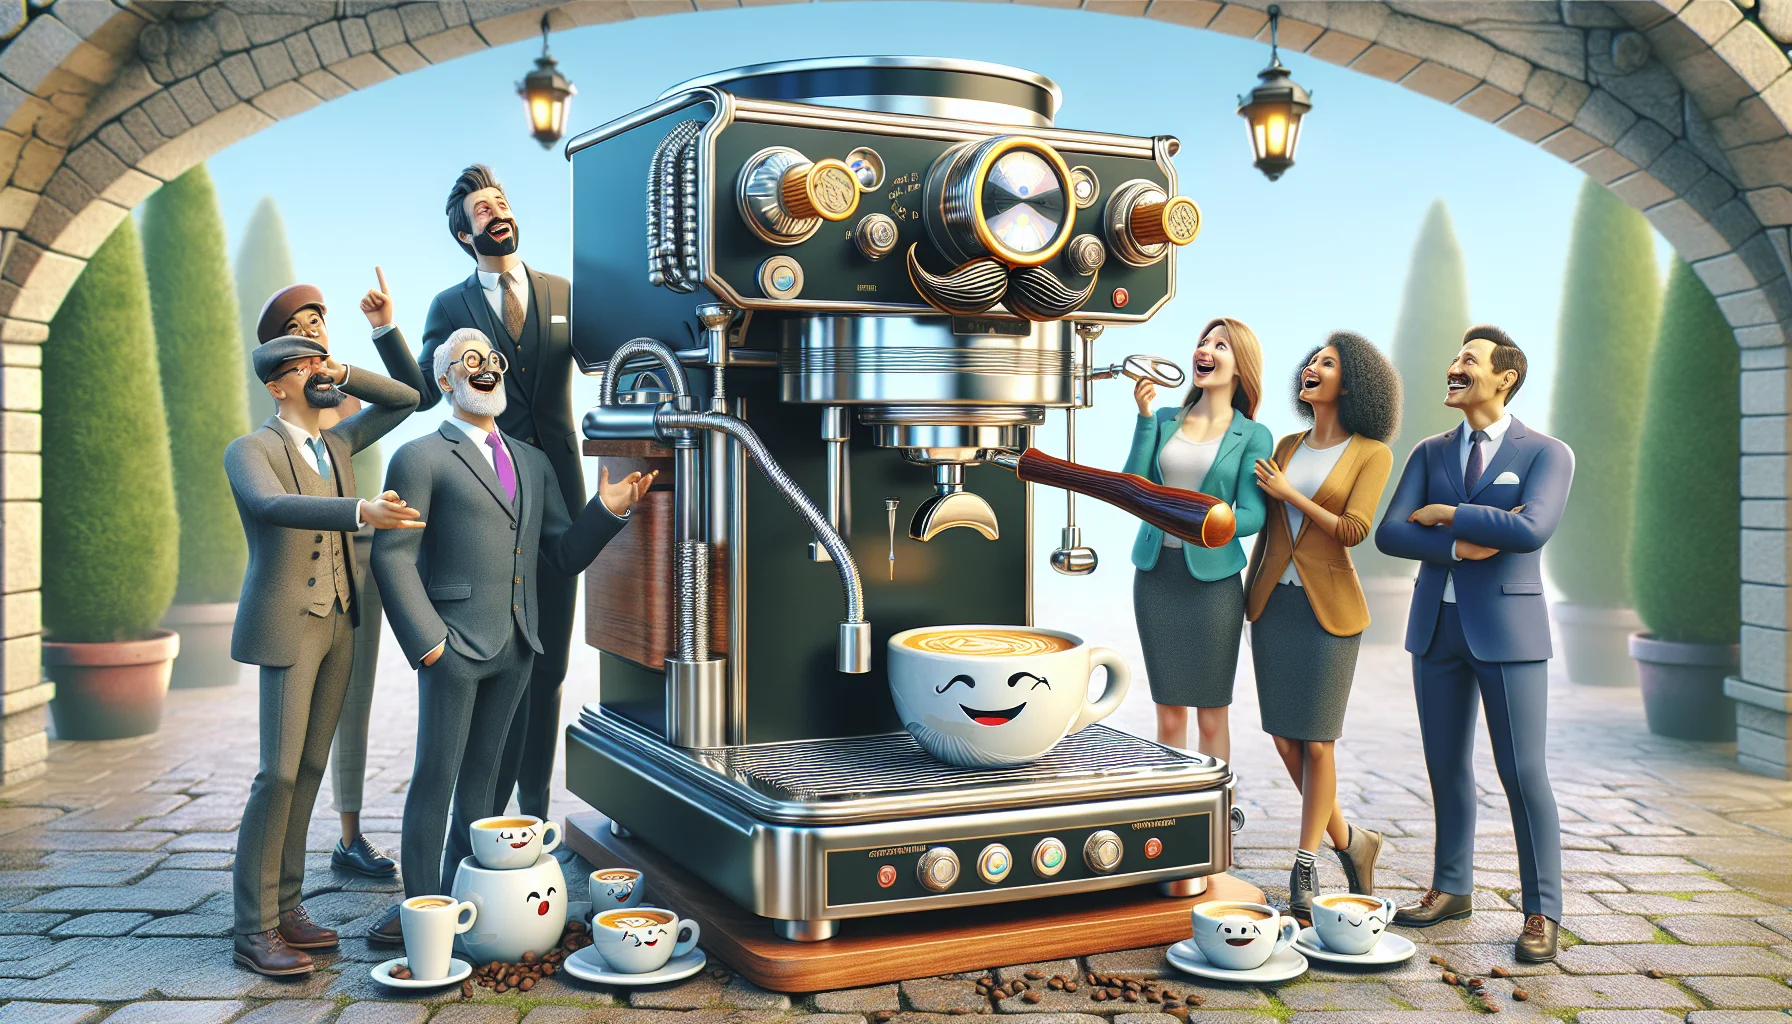 Create a detailed and realistic depiction of an automatic tamper espresso machine in an amusing scenario. The machine boasts a larger-than-life personality, donned with a mustache and monocle, as it brilliantly performs its task. There are cups of espresso around it with little smiley faces, exuding an air of satisfaction. On one side, a group of diverse people, consisting of a Caucasian man, a Hispanic woman, a Middle-Eastern man, and a South Asian woman, all utter expressions of surprise and delight. They stand in an enchanted coffee shop setup, enjoying the theatrics of this charming piece of machinery.